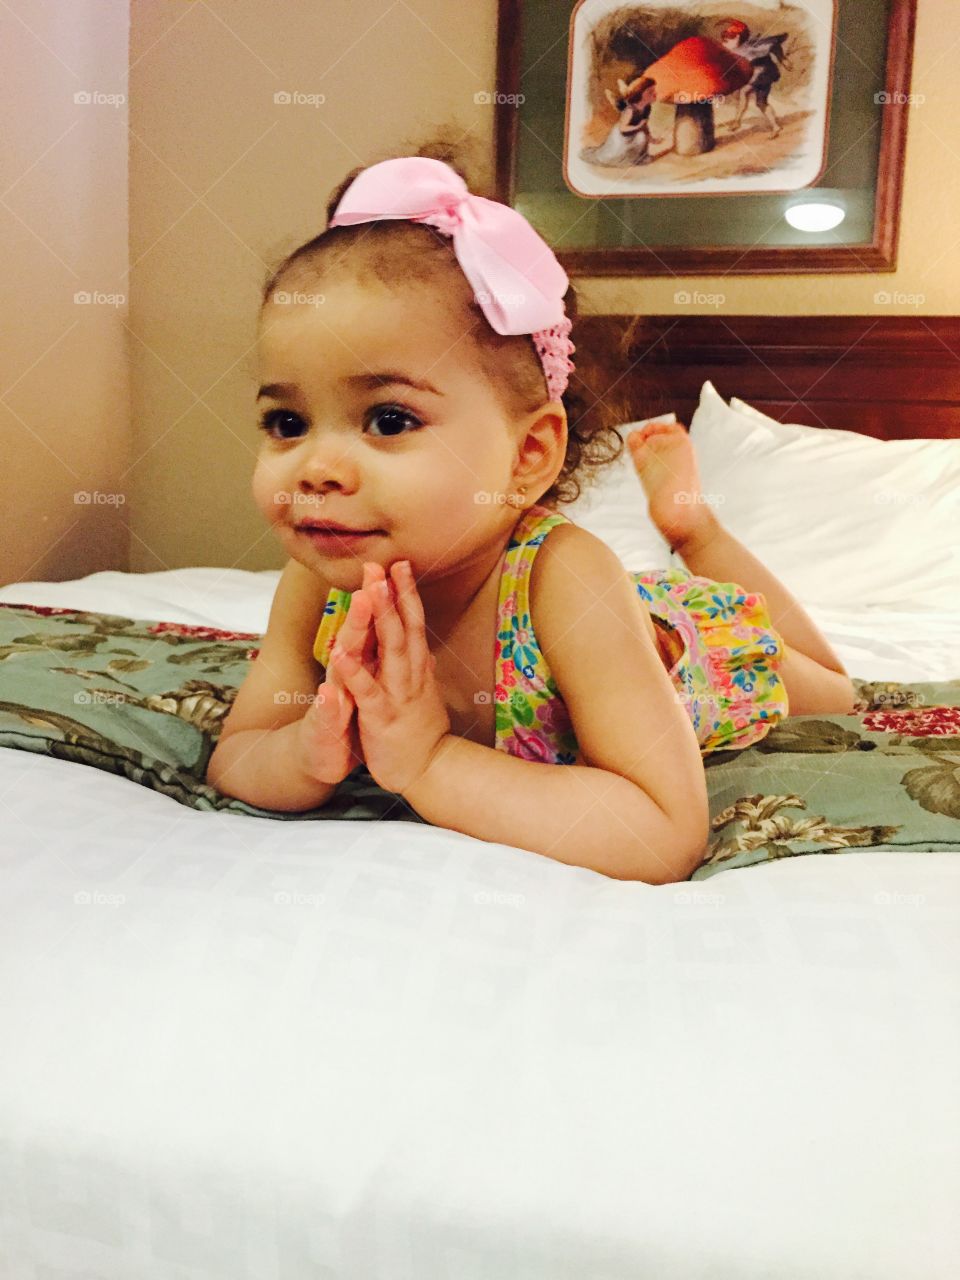 I'm ready for my Close-up!. Cute baby in a swimsuit, about to head out to the waterpark